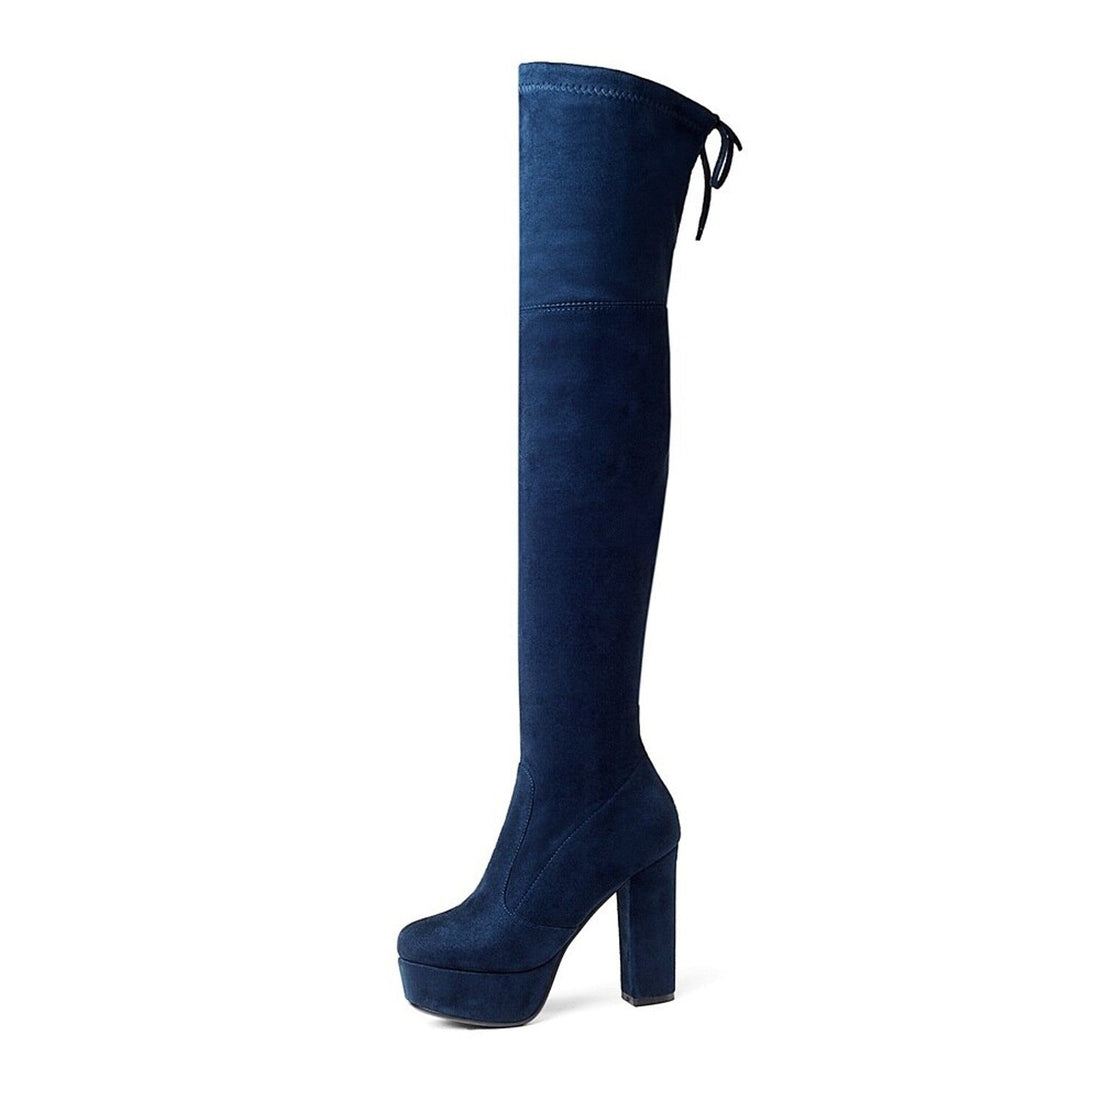 Women's Winter Faux Suede High Boots